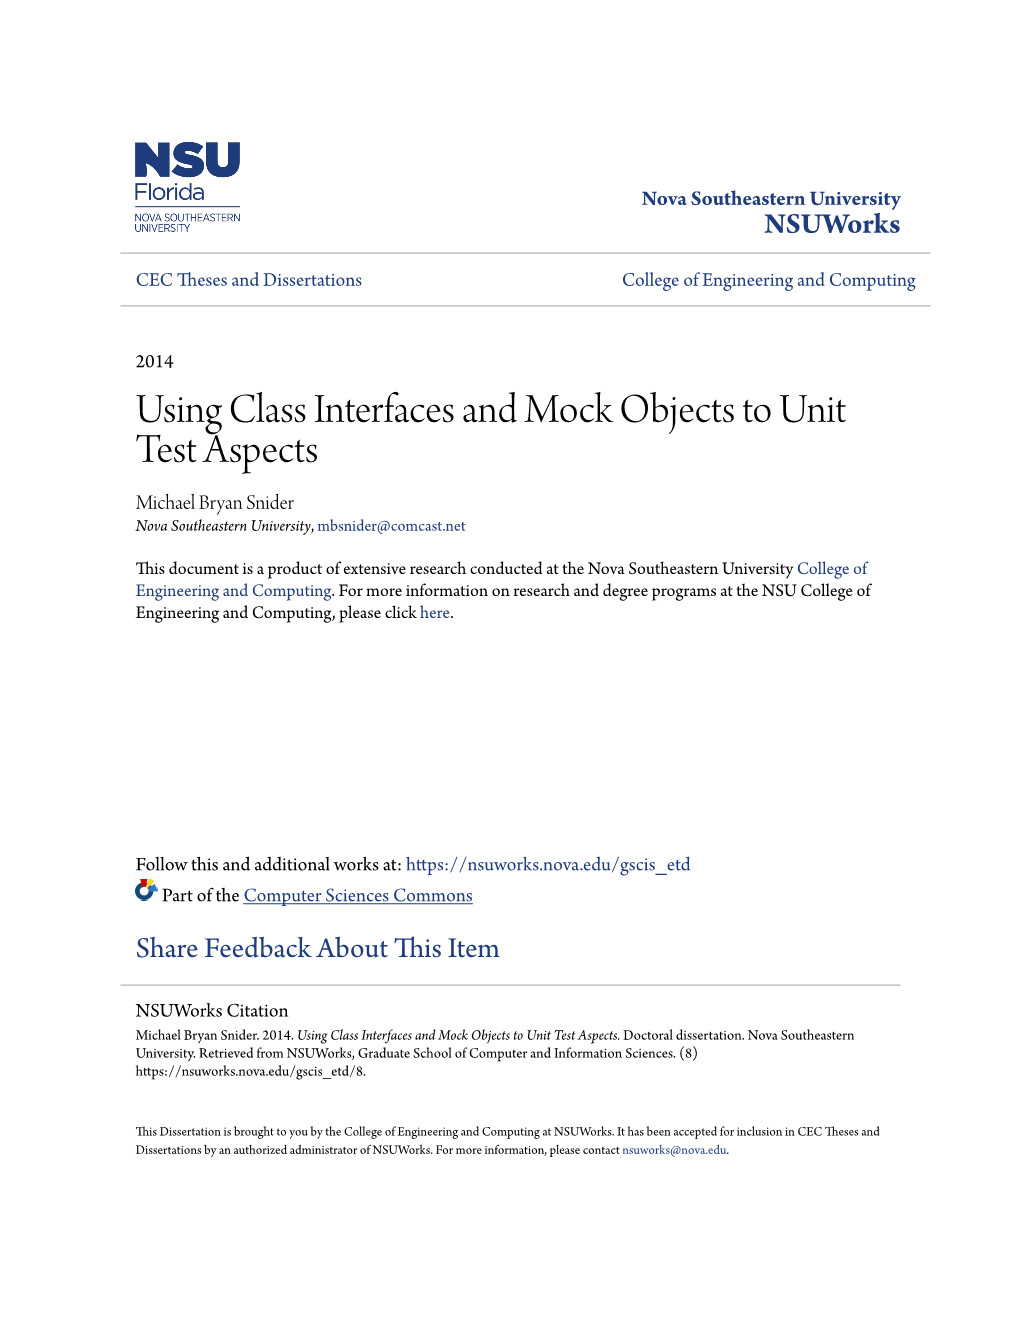 Using Class Interfaces and Mock Objects to Unit Test Aspects Michael Bryan Snider Nova Southeastern University, Mbsnider@Comcast.Net